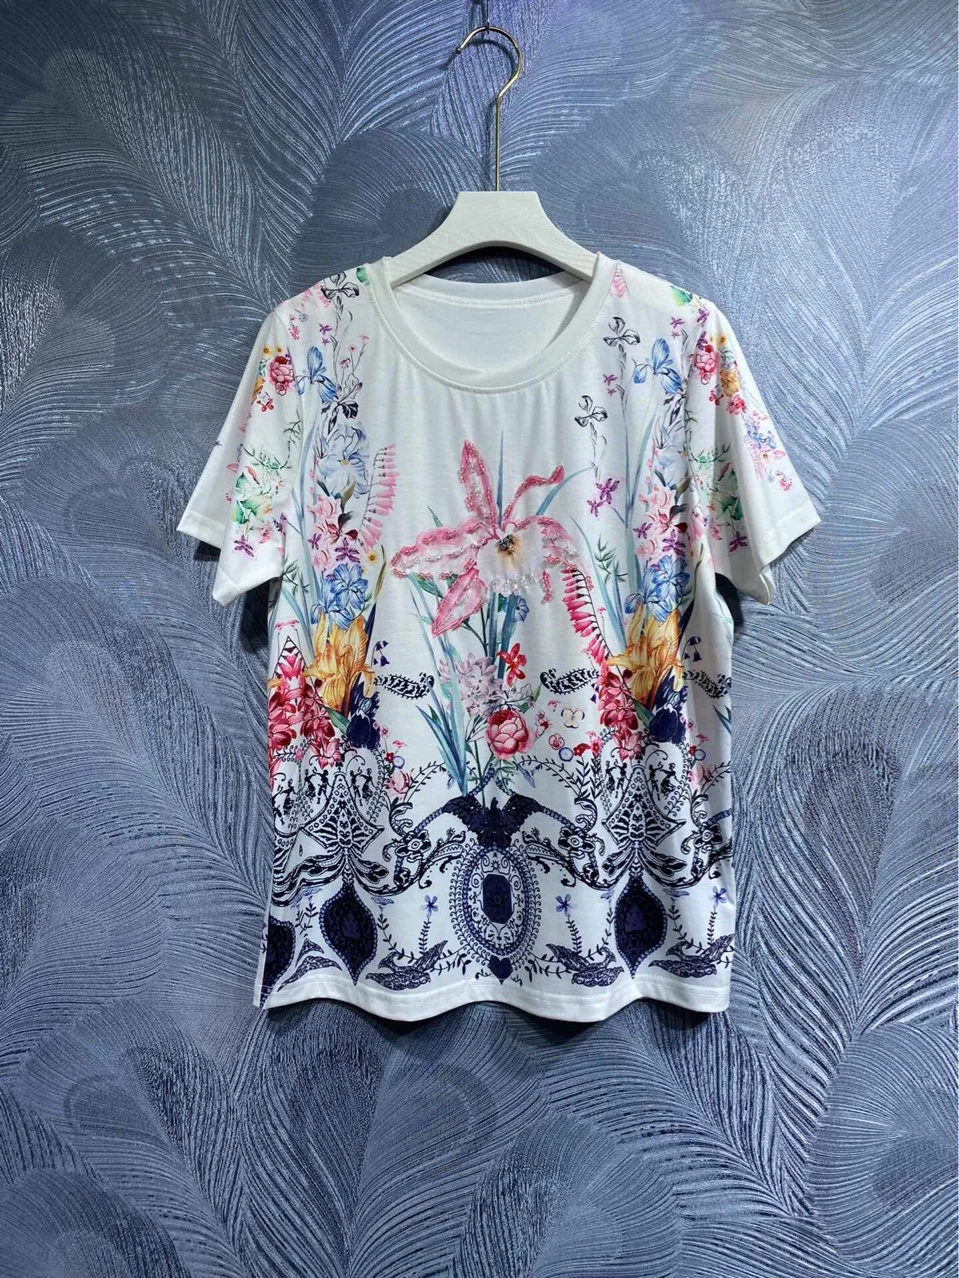 2023 Spring Summer Chic Women's High Quality Floral Print Beading Tee Tops B890